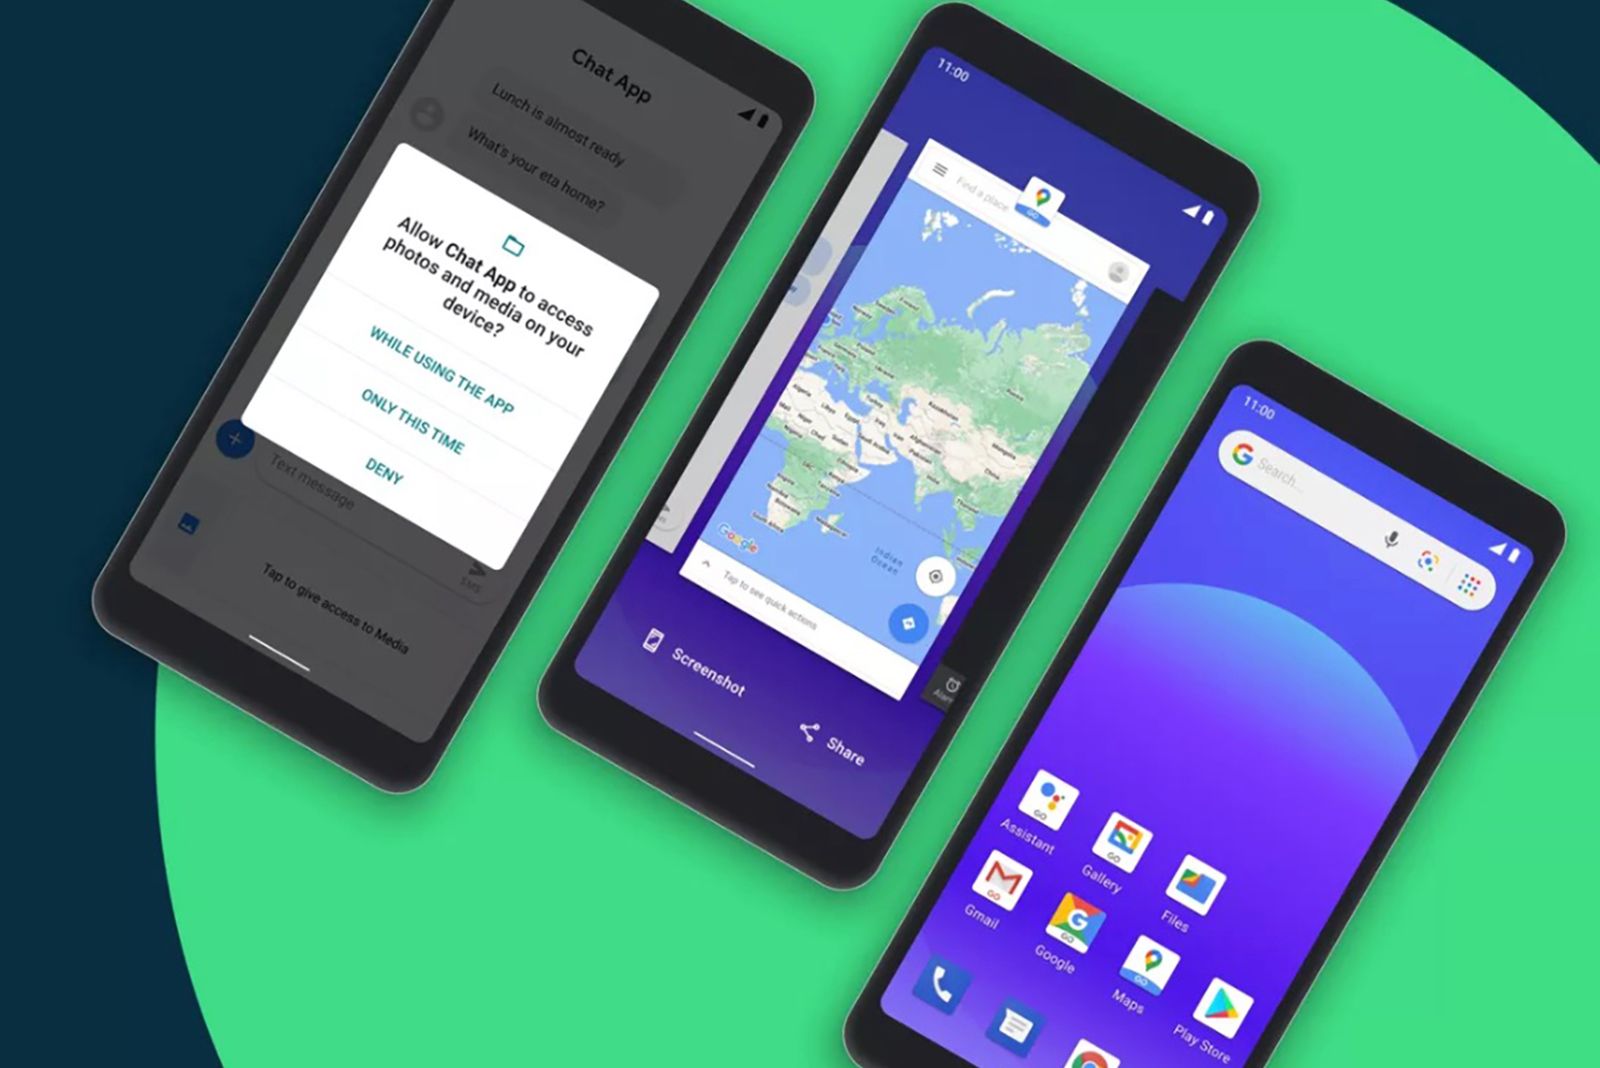 Android 11 (Go edition) will help your low-powered phone launch apps faster photo 1